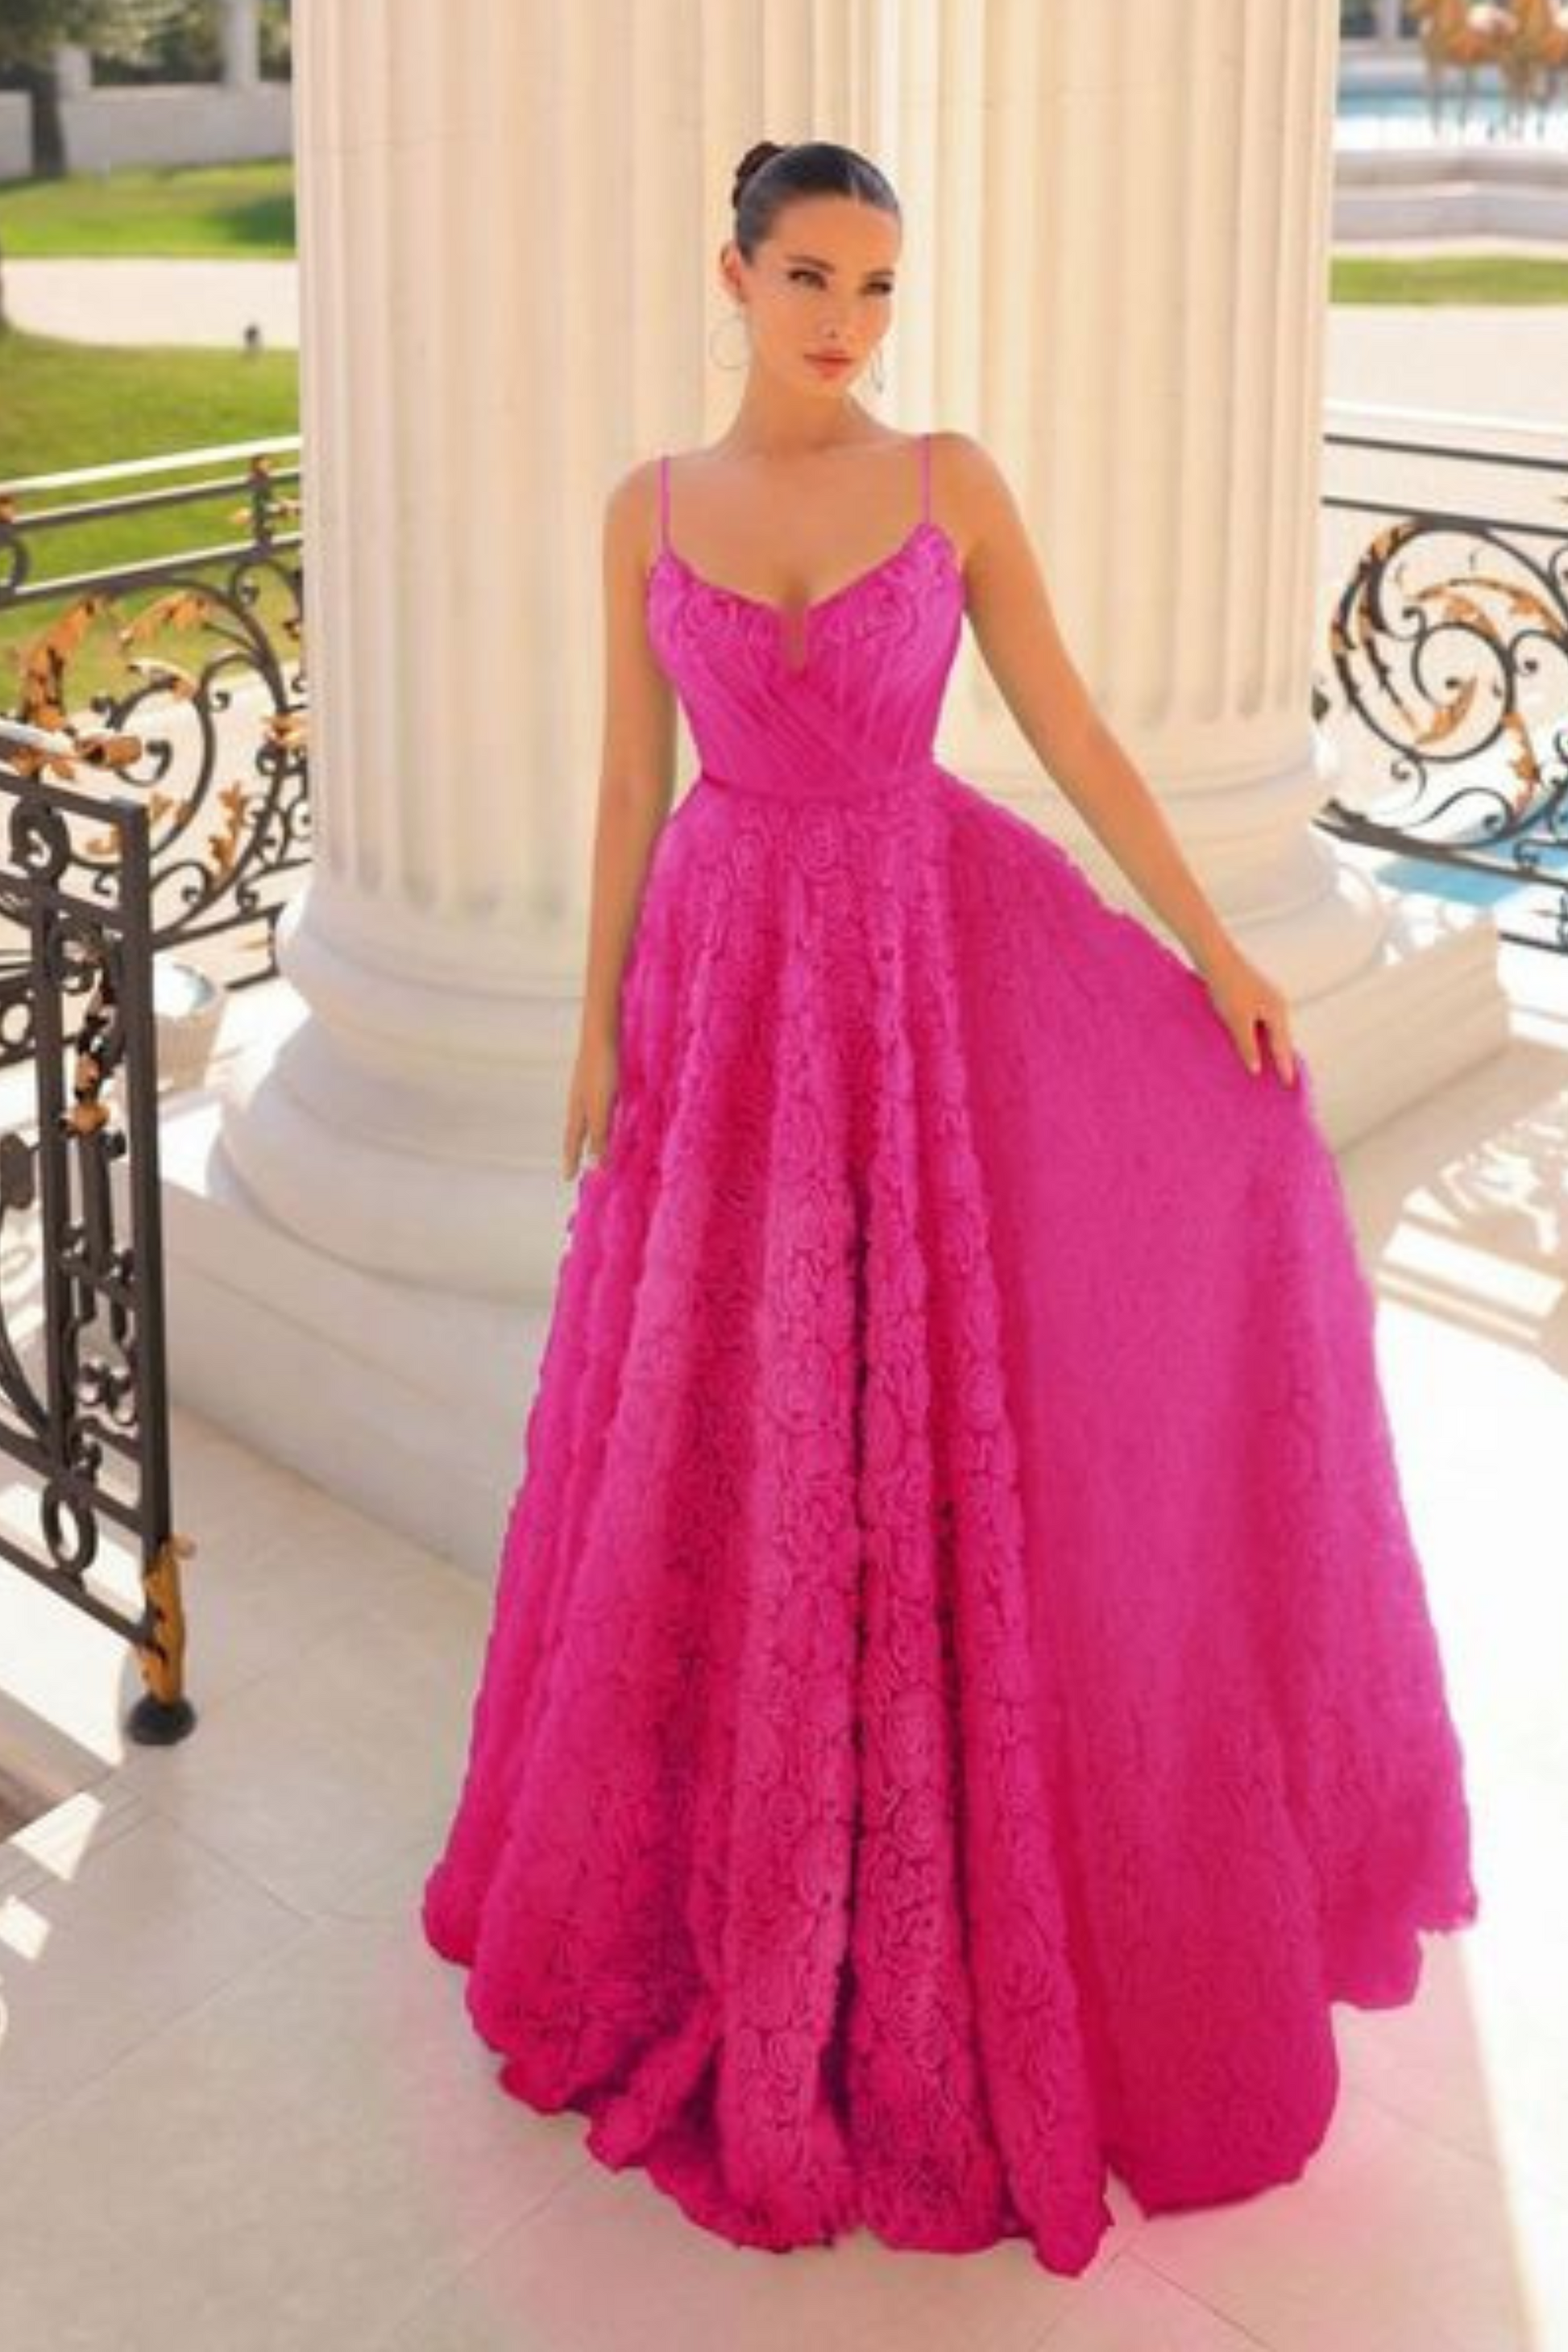 Tina Holly textured A line dress with corseted bodice and rosette details in neon hot pink tulle